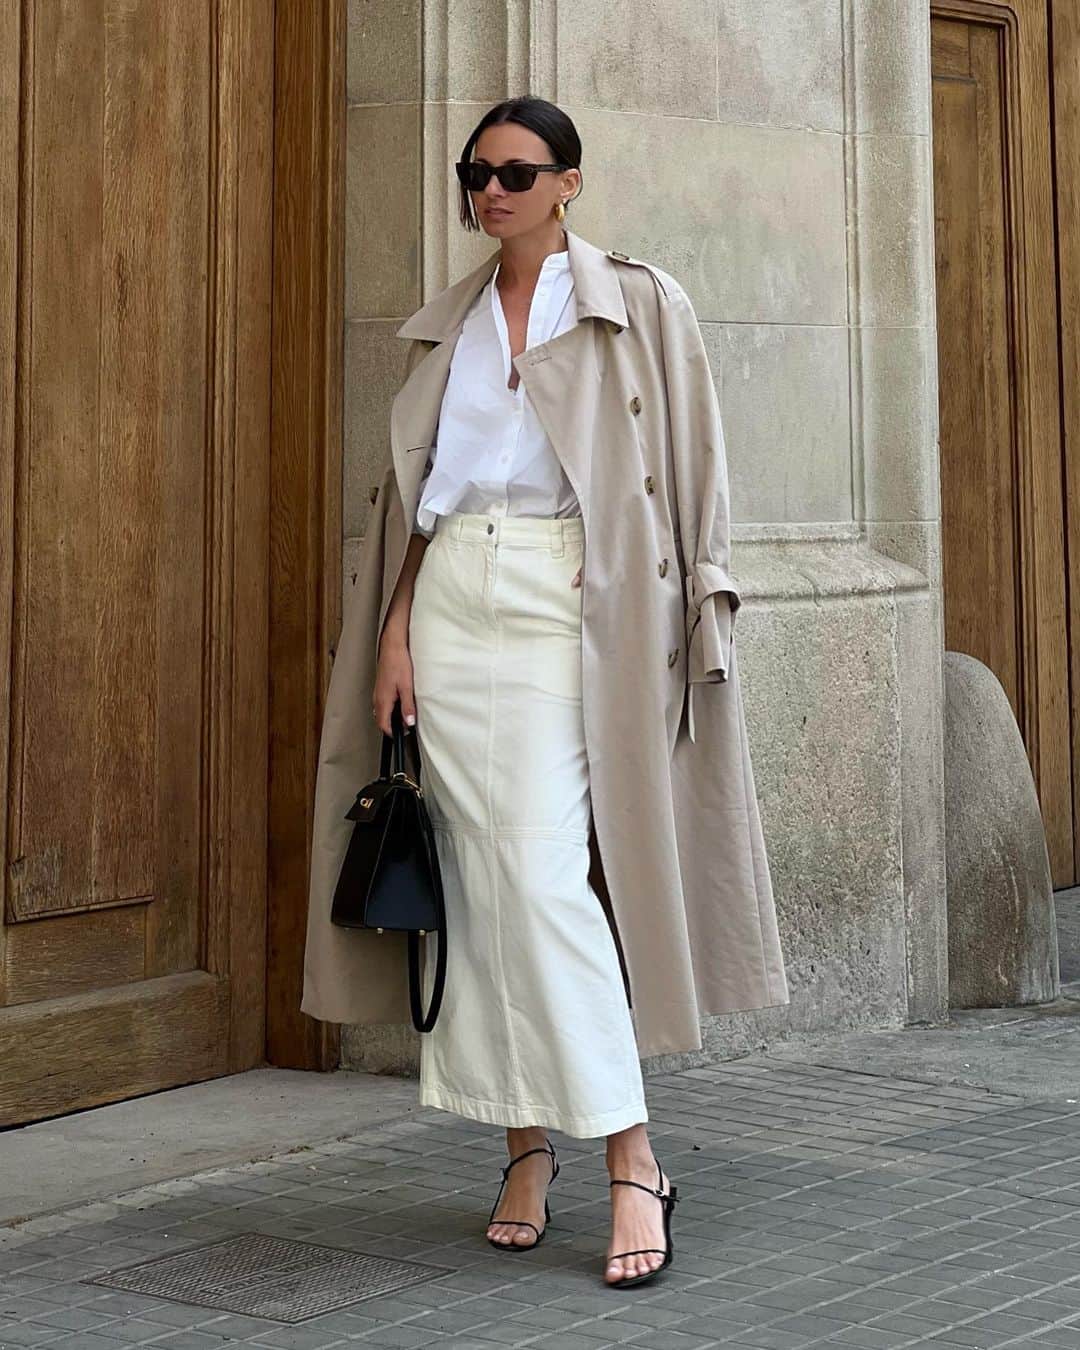 Zina Charkopliaのインスタグラム：「I can’t get enough of this look🤍 #skirt #dailylook #fashion #style #sandals #spring #dailystyle #trenchcoat  Credits @fashionmoodpe」